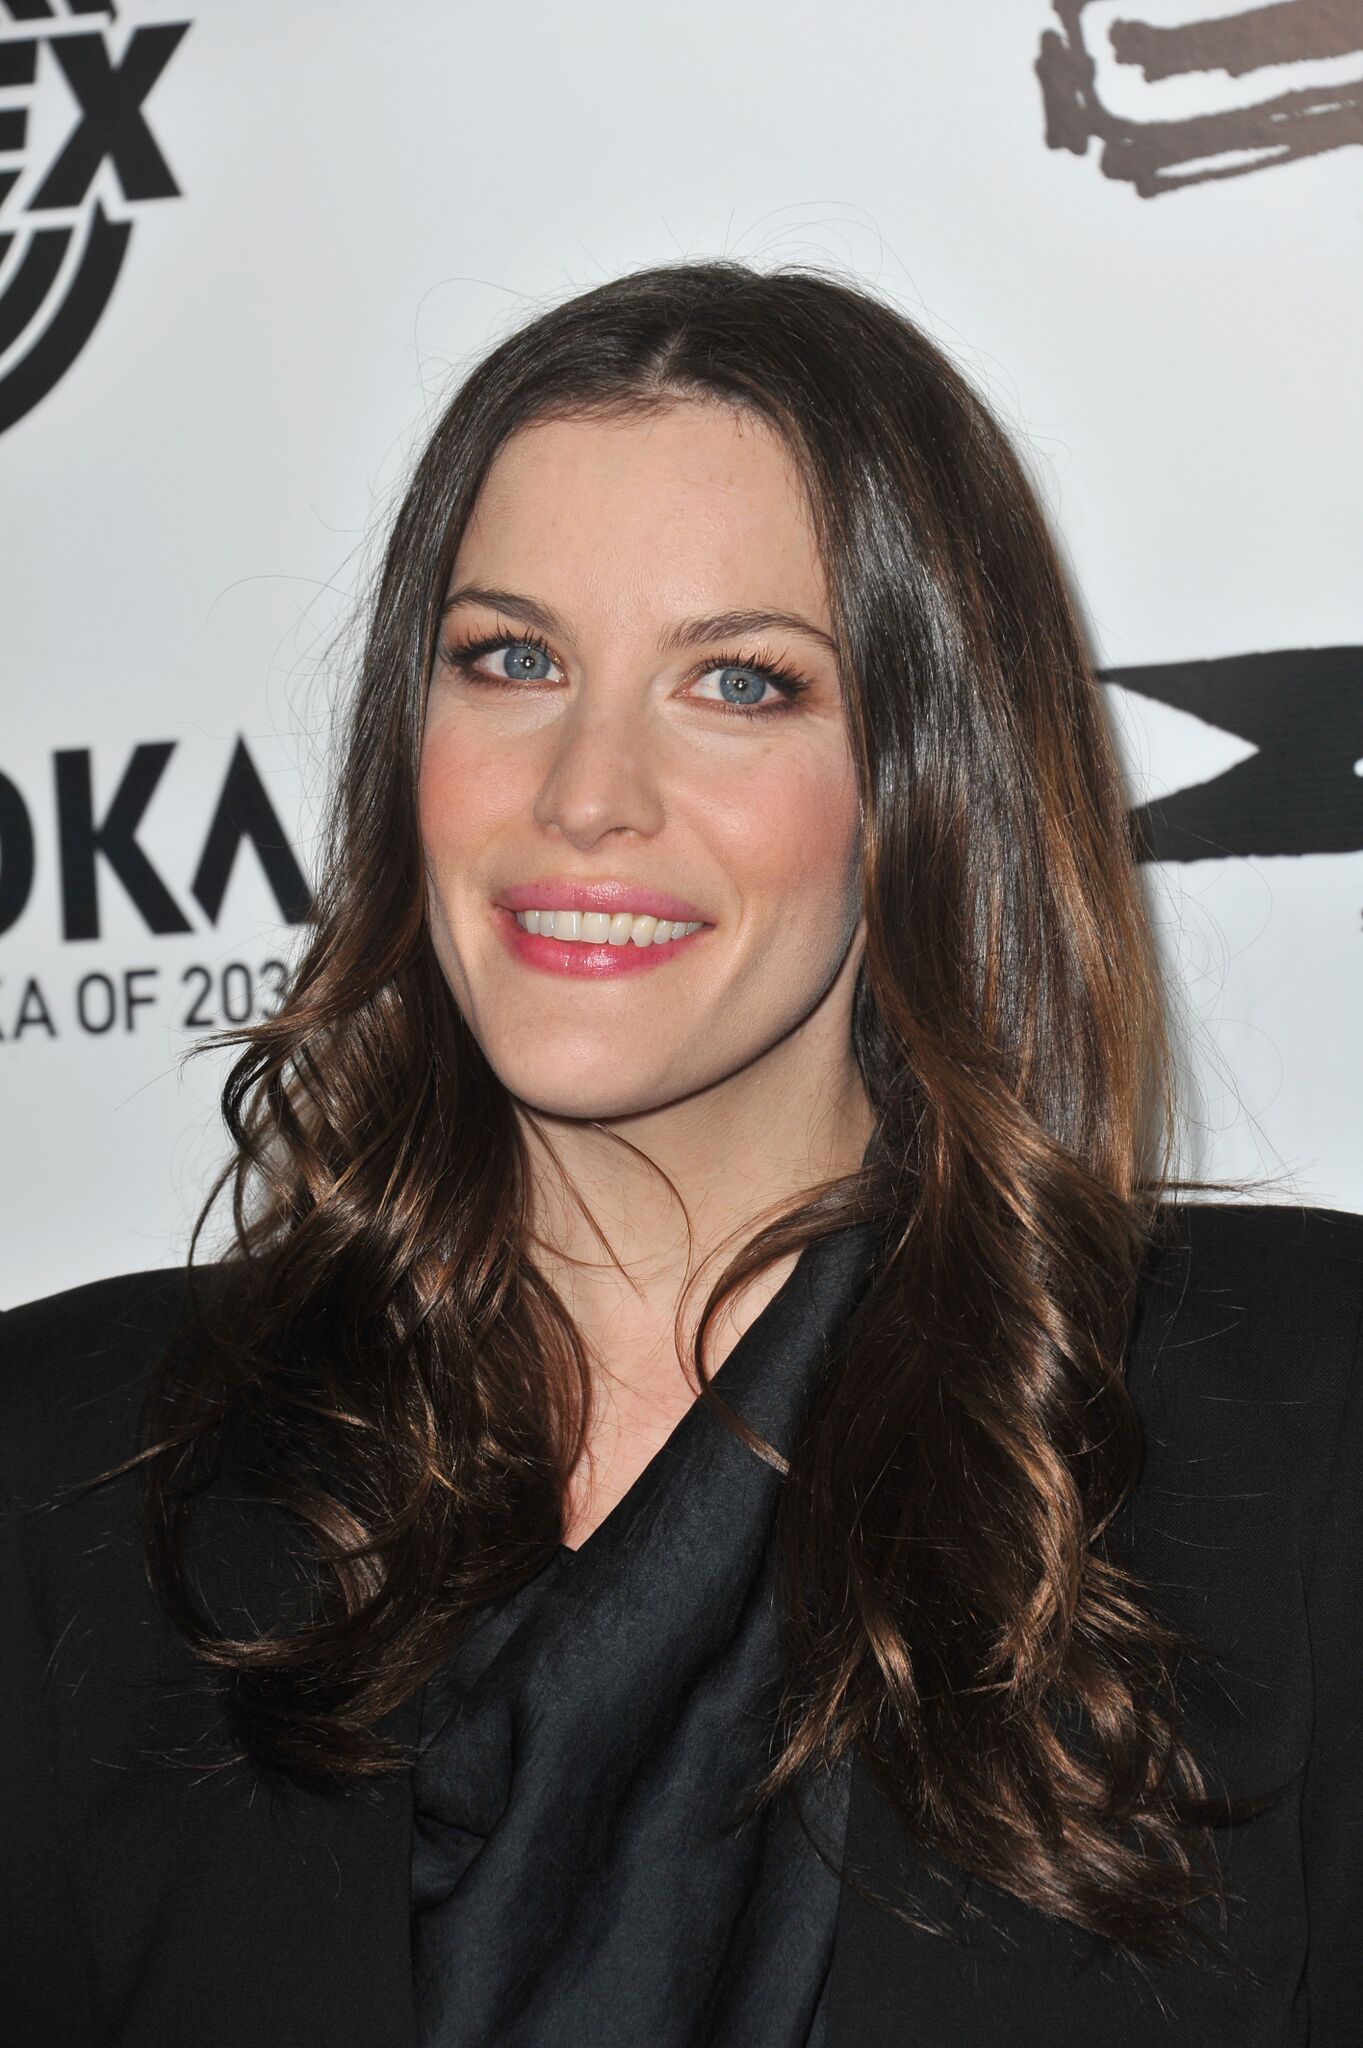 Liv Tyler at the Los Angeles premiere of her new movie "Super" at the Egyptian Theatre, Hollywood | Shutterstock